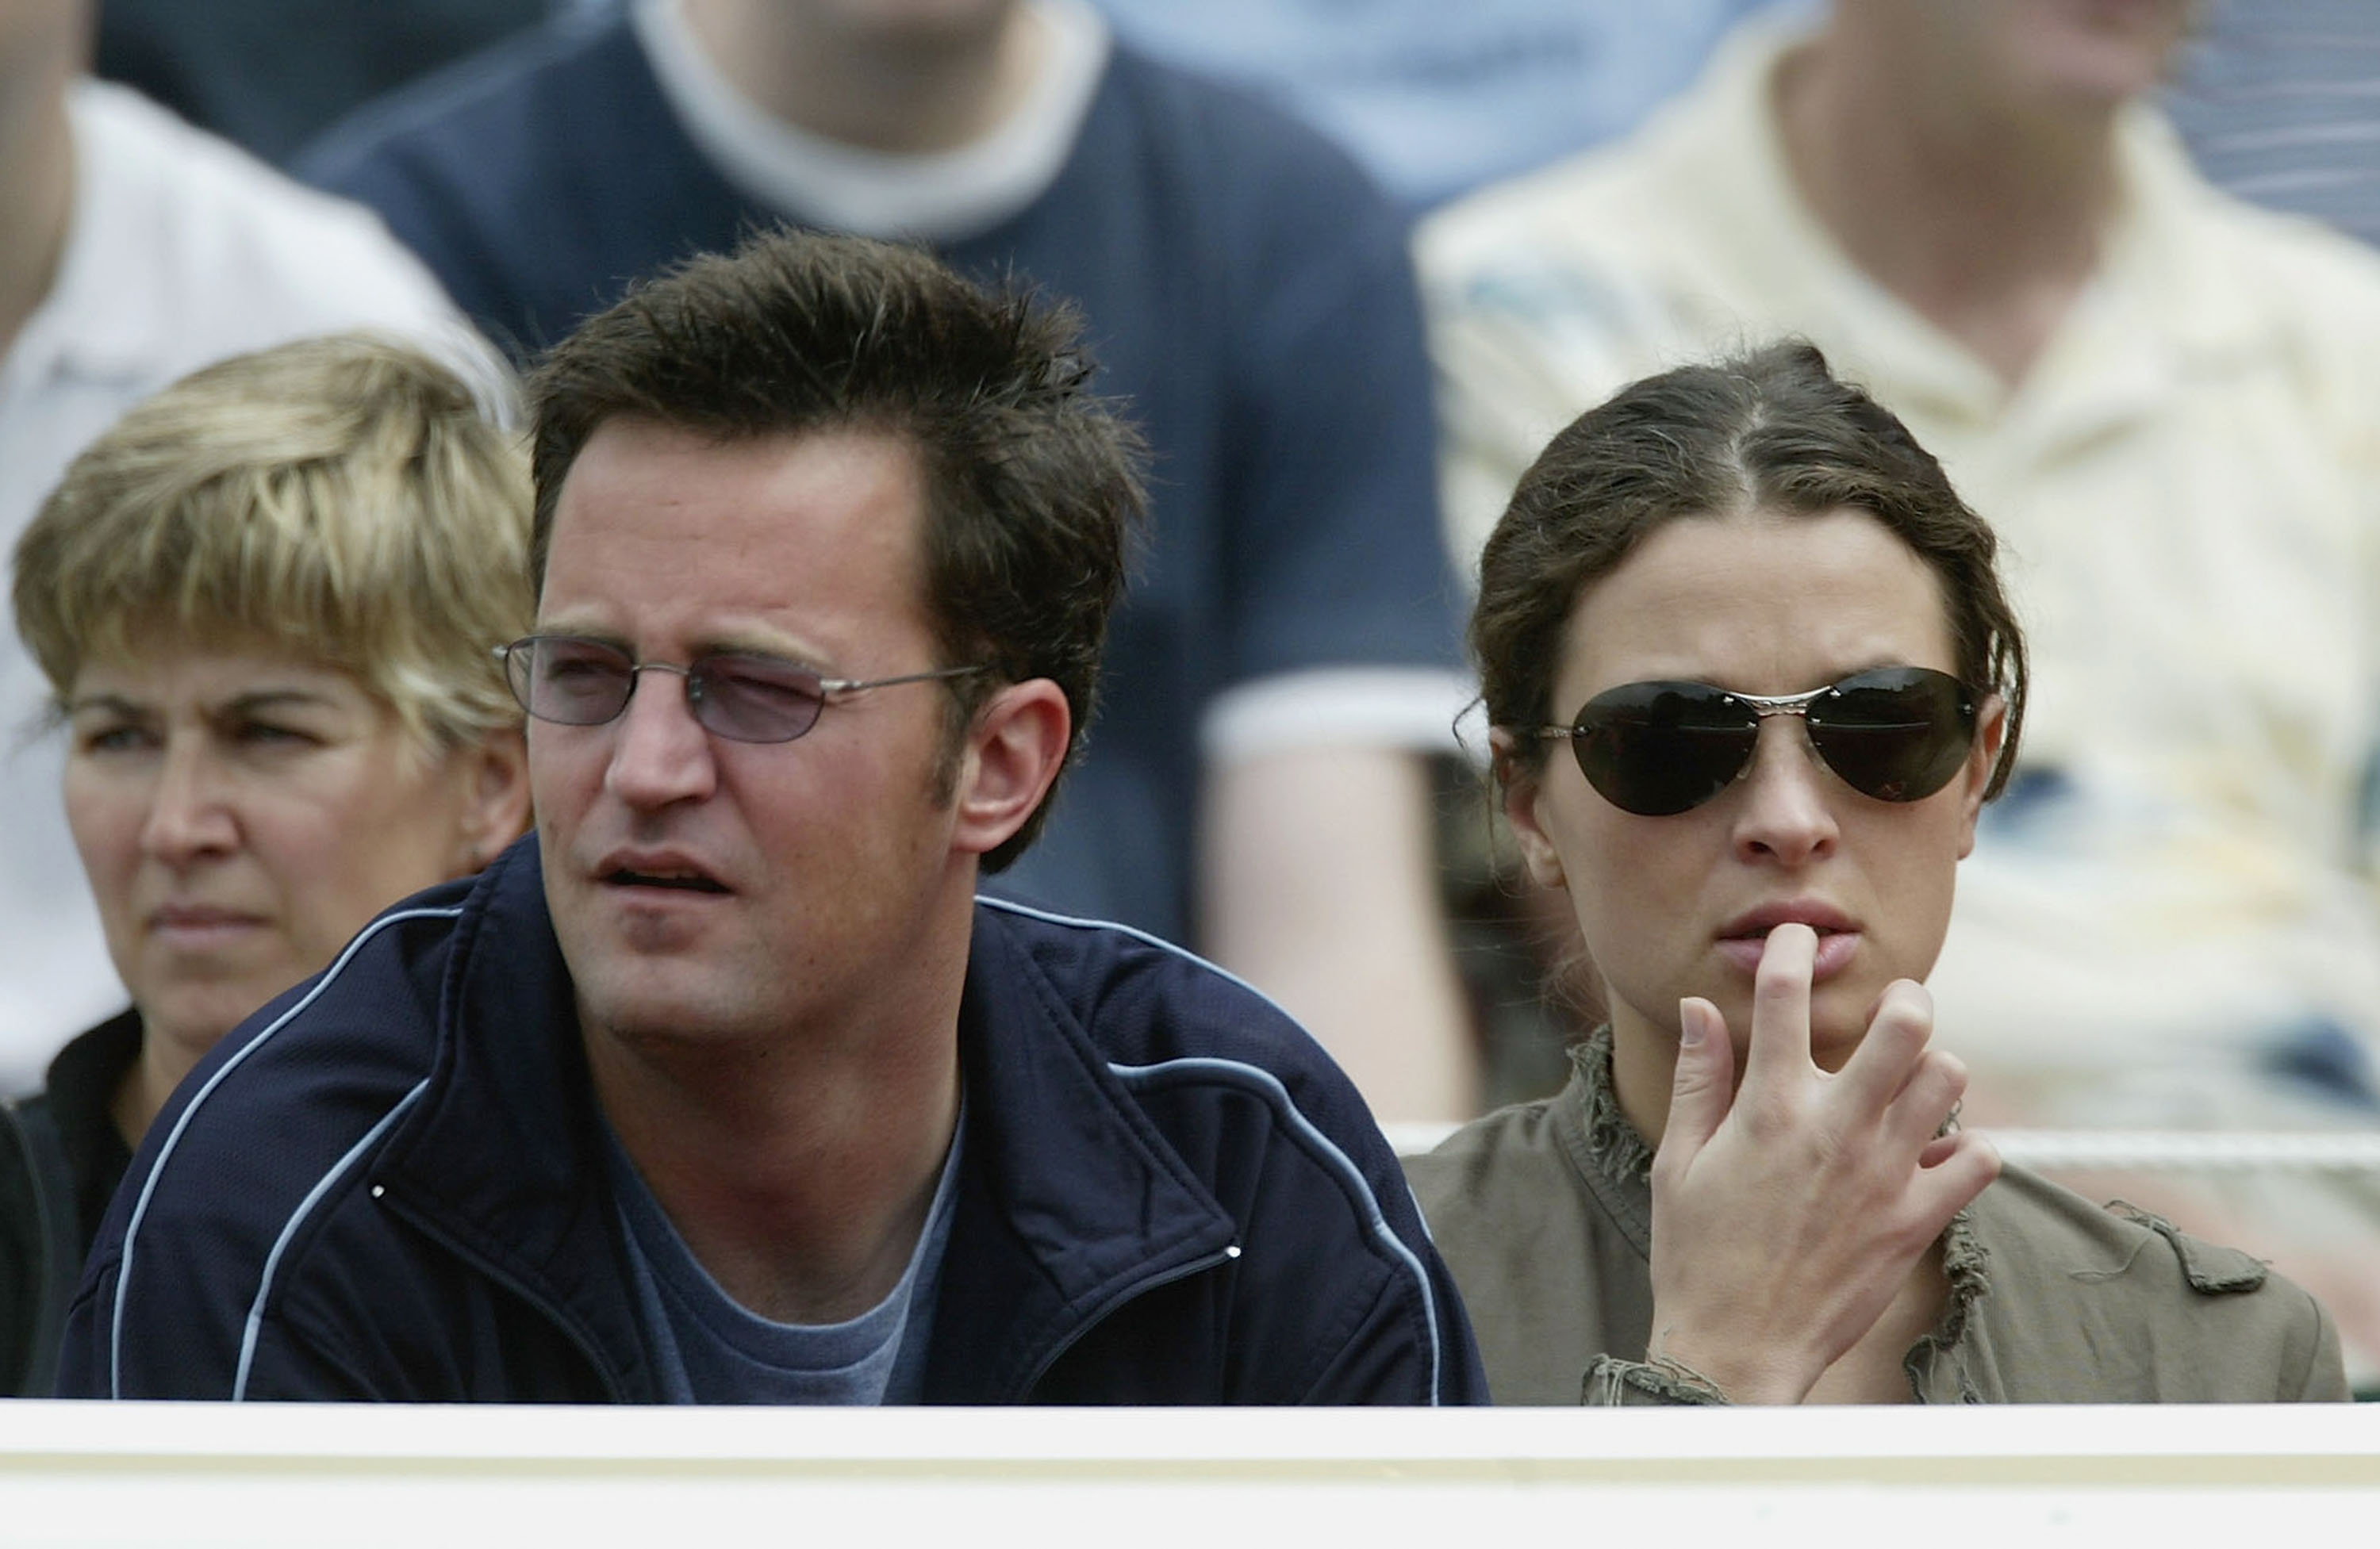 Matthew Perry and Rachel Dunn watching a match on June 10, 2003, in London, England | Source: Getty Images